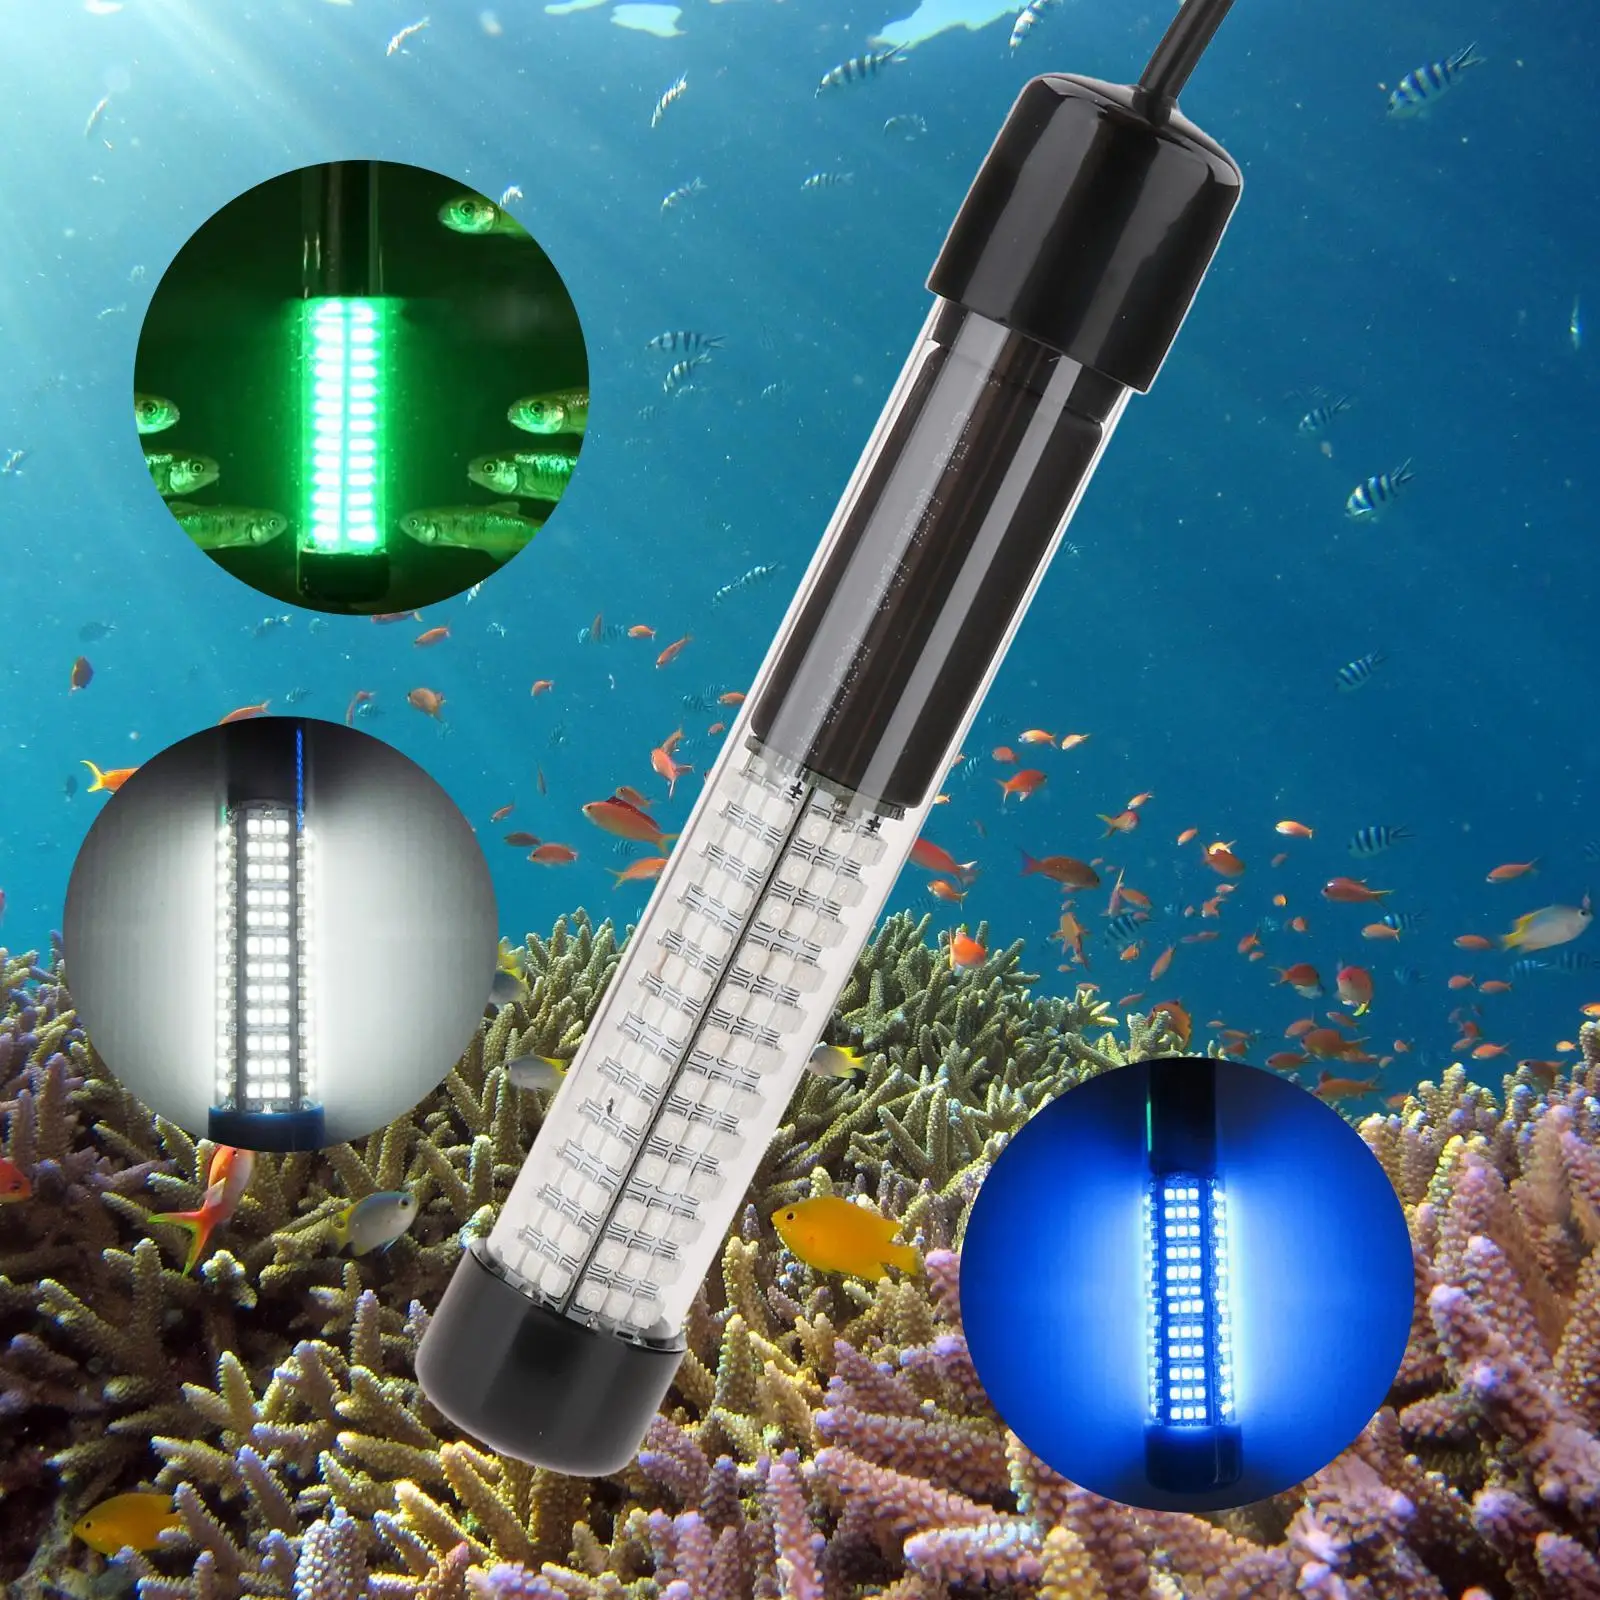 LED Submersible Fishing Light 5M Cord Portable Super Bright Waterproof Outdoor Night Fishing Finder for Saltwater Sea Fishing